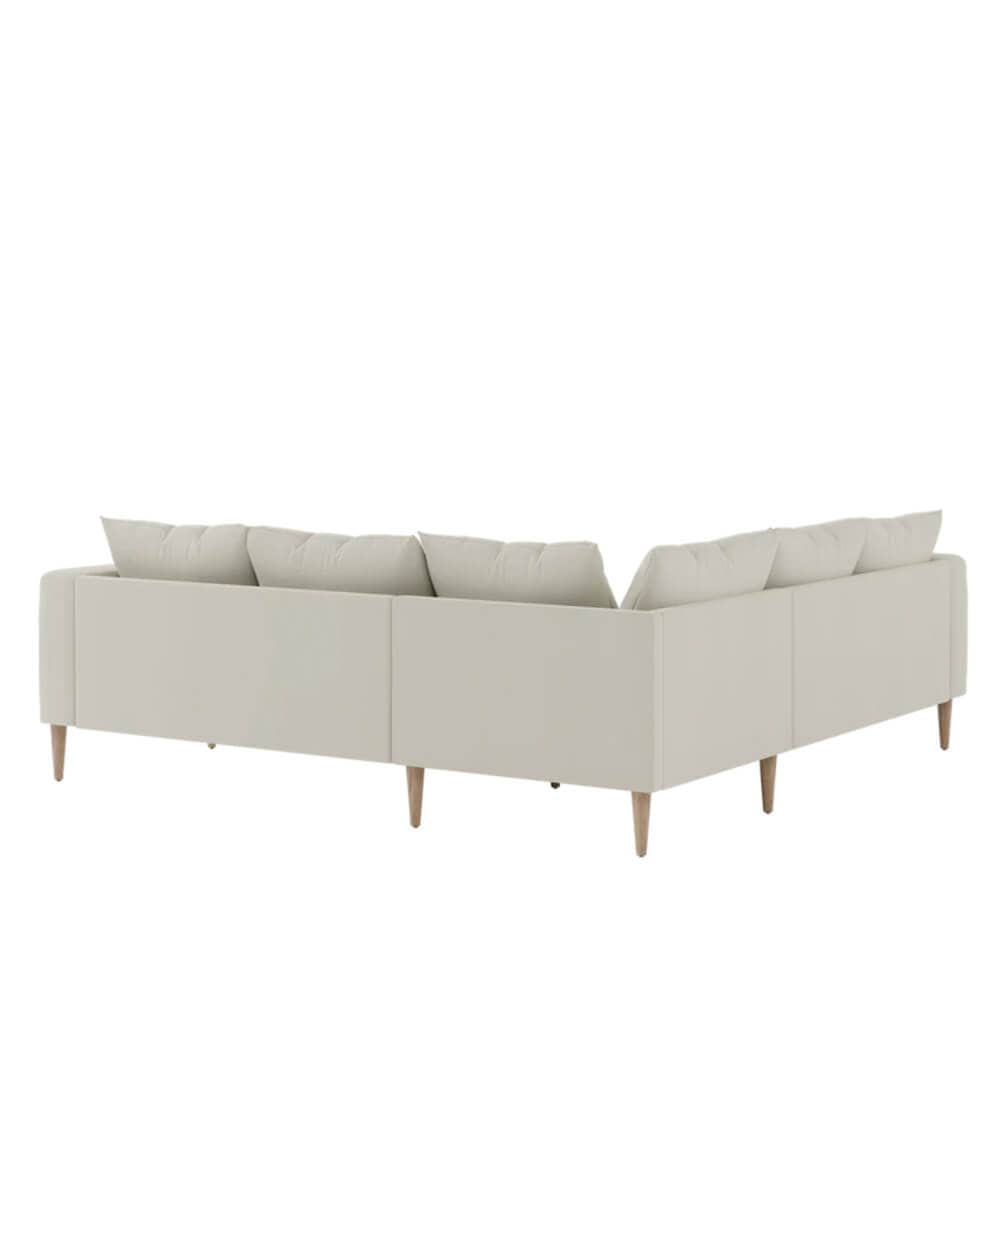 The Essential Corner Sectional (5 Seat)